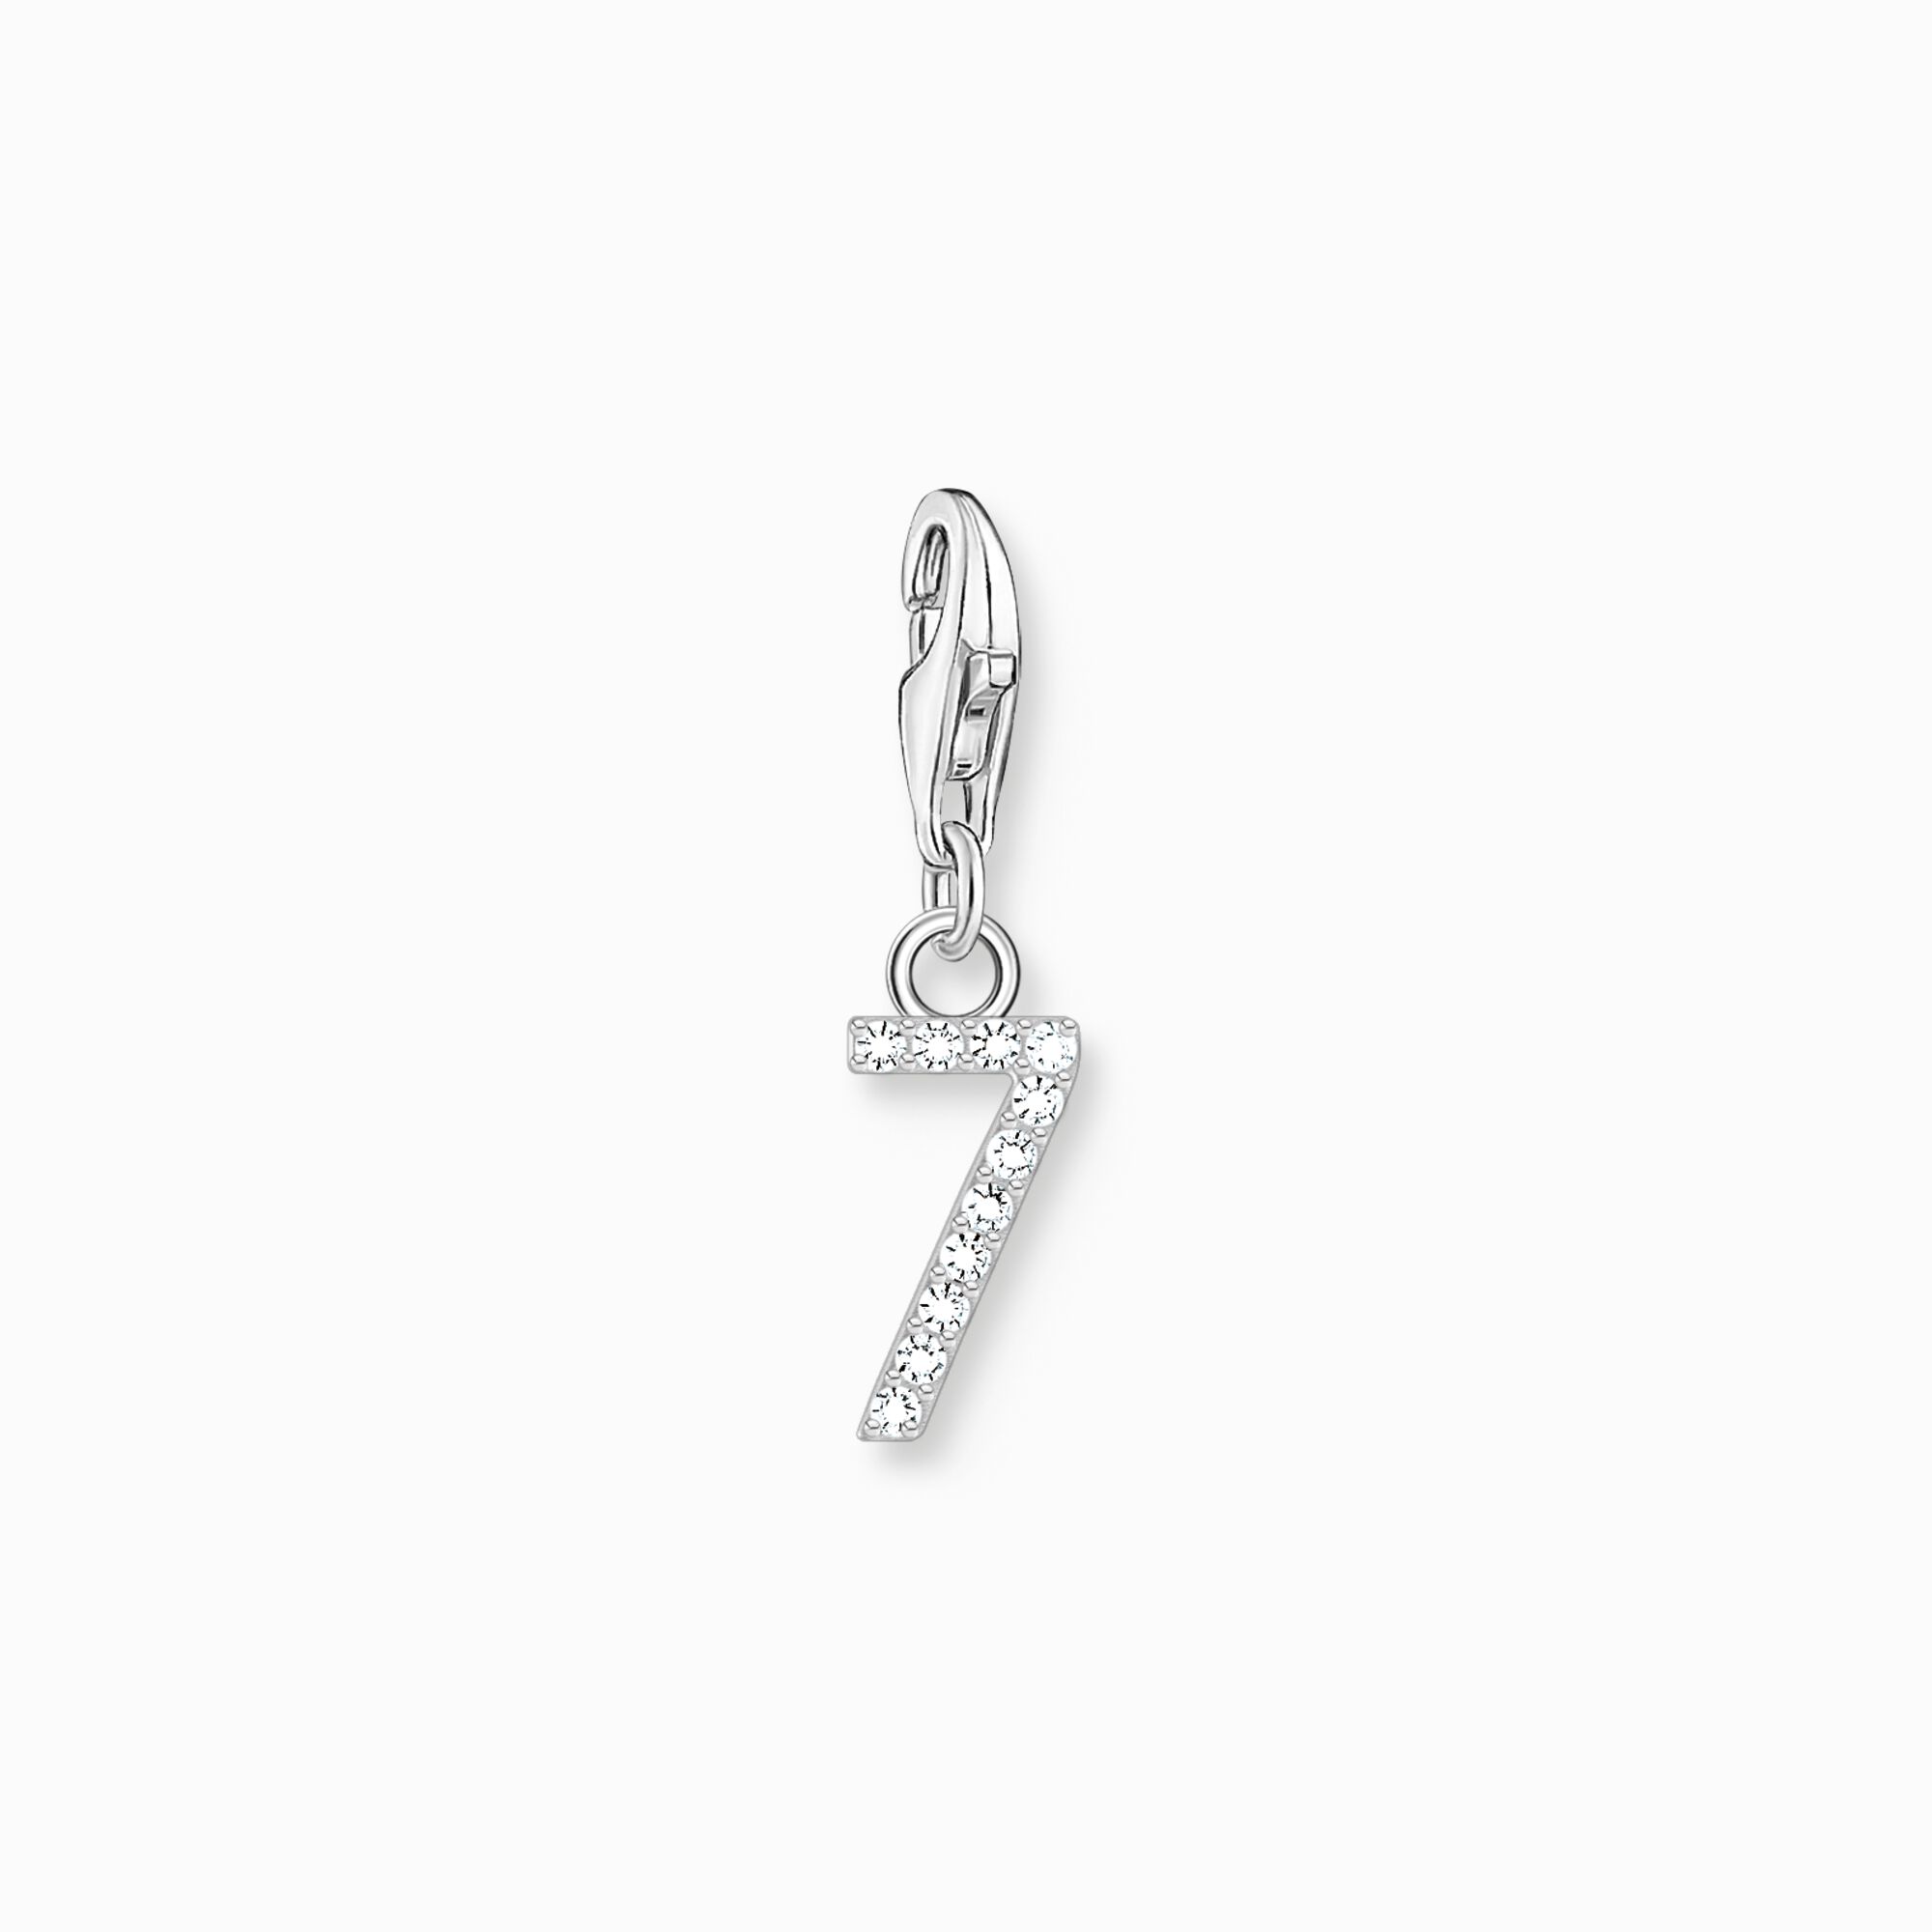 Silver charm pendant number 7 with zirconia from the Charm Club collection in the THOMAS SABO online store